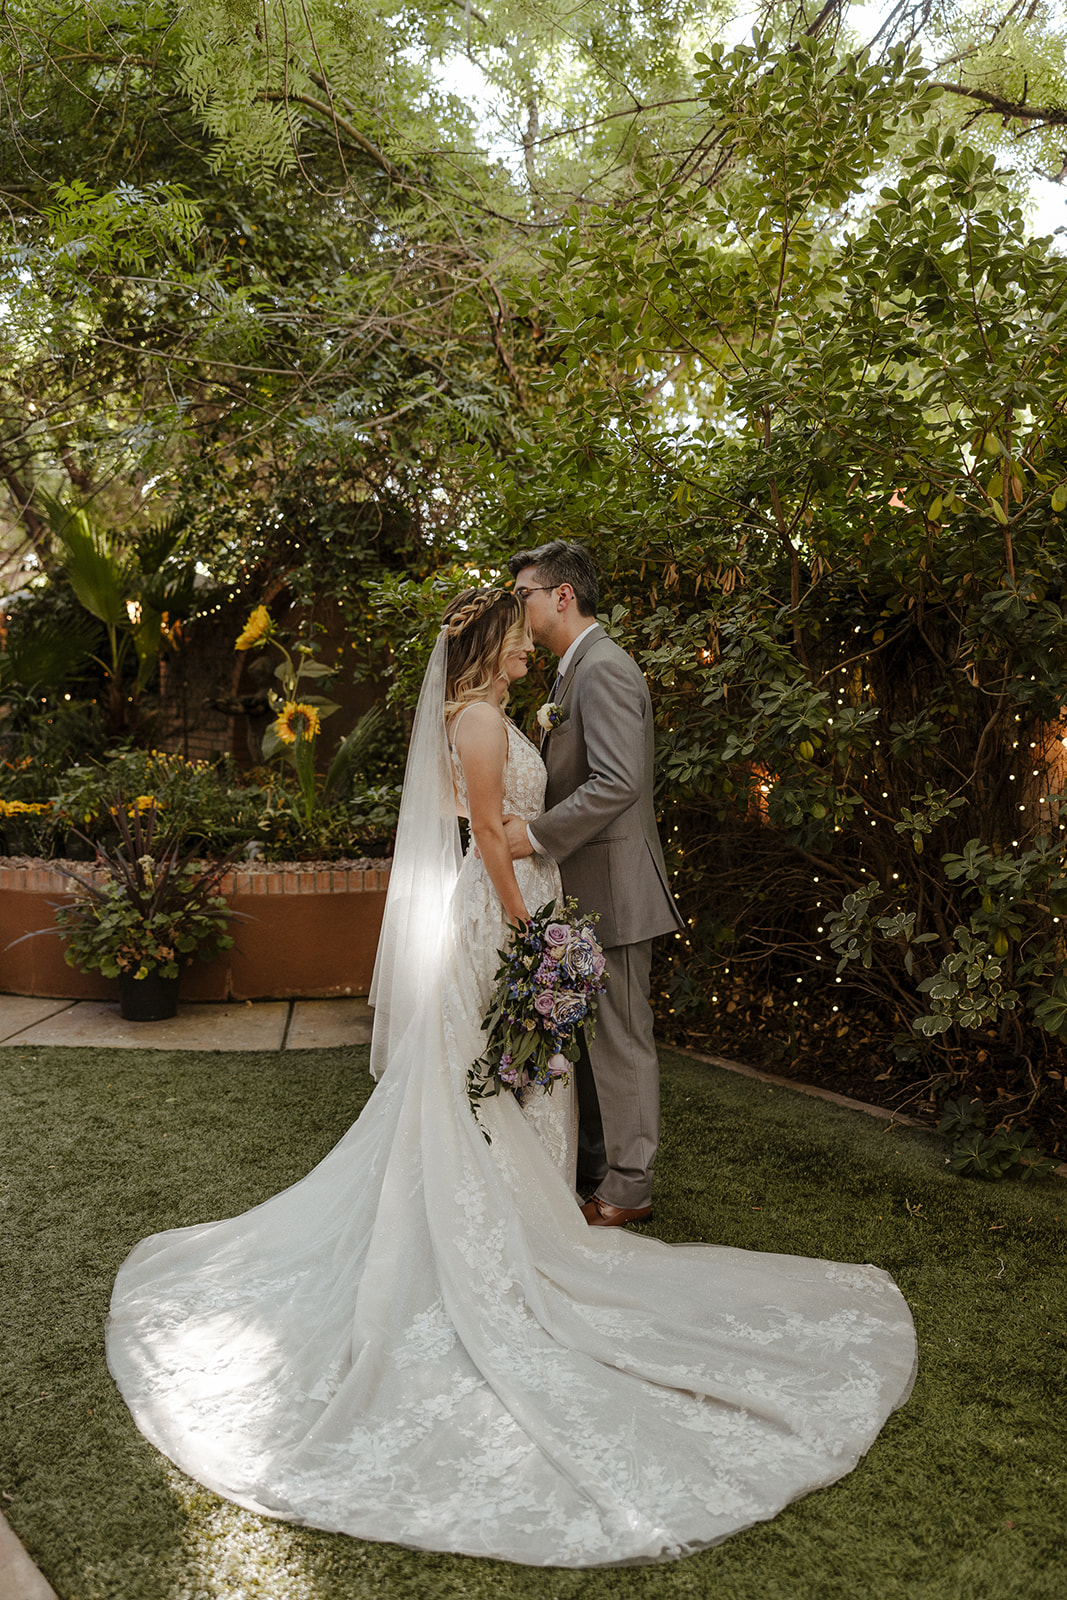 Beautiful bride and groom share an intimate moment after their dreamy Arizona wedding